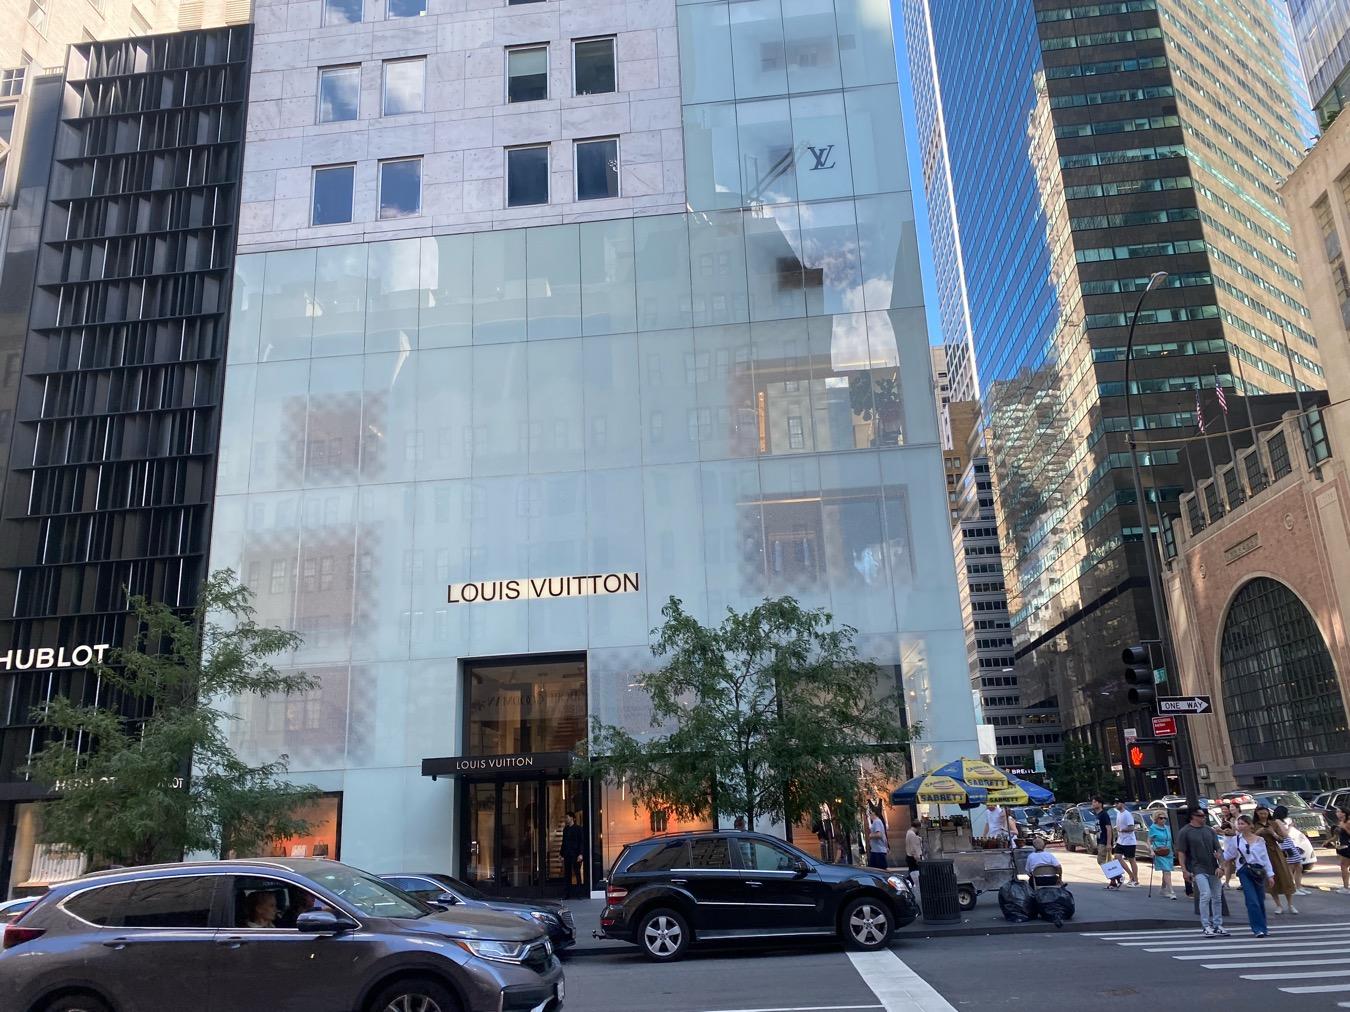 NEW YORK, 1 East 57th St (Louis Vuitton), FT